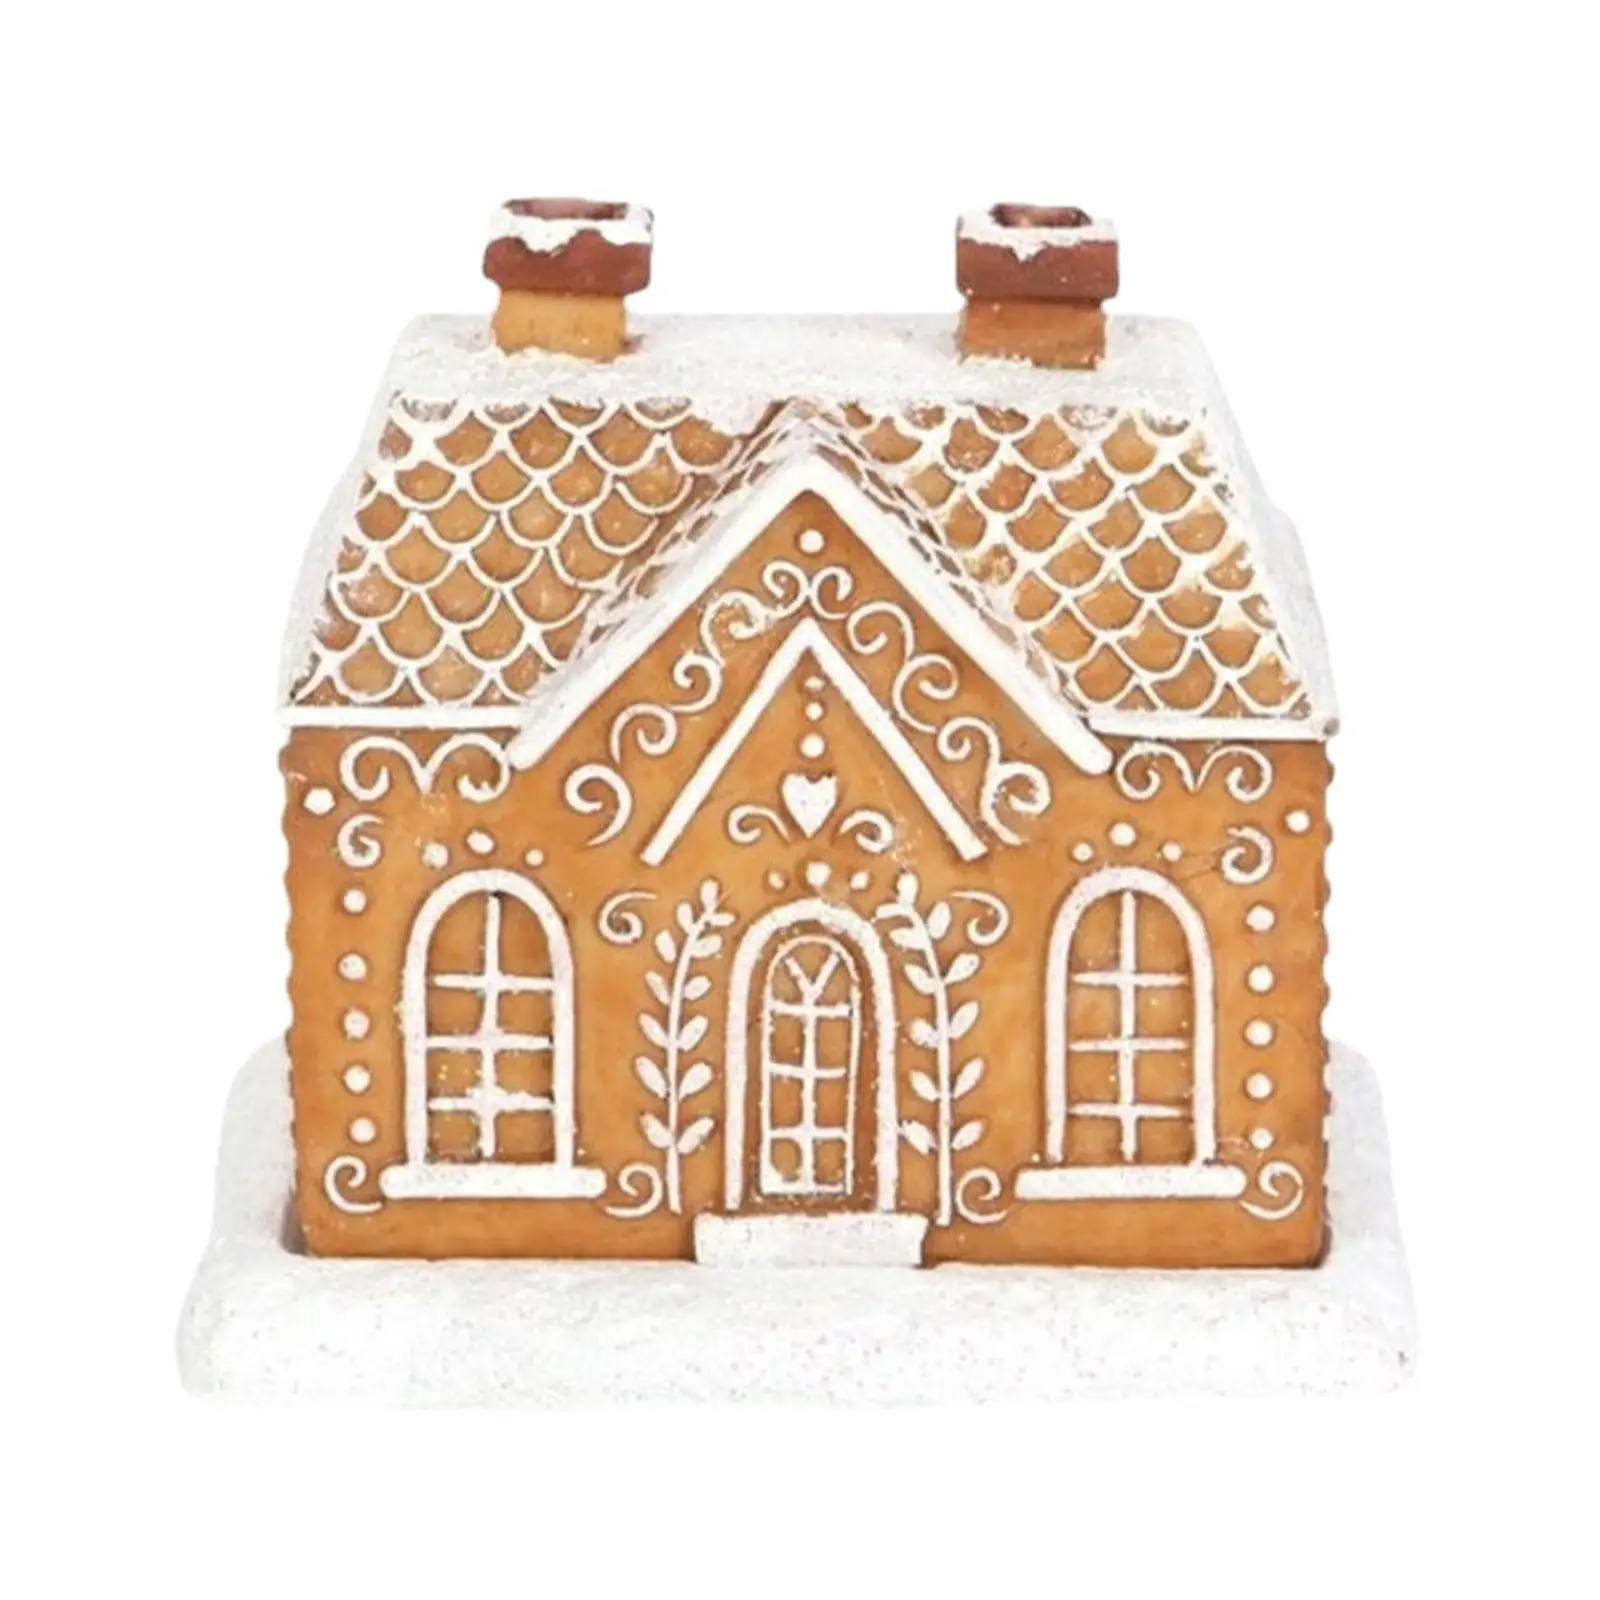 Christmas Incense Holder Backflow Chimney Creative Crafts Xmas Ornament Decoration for Collectible Home Table Holiday